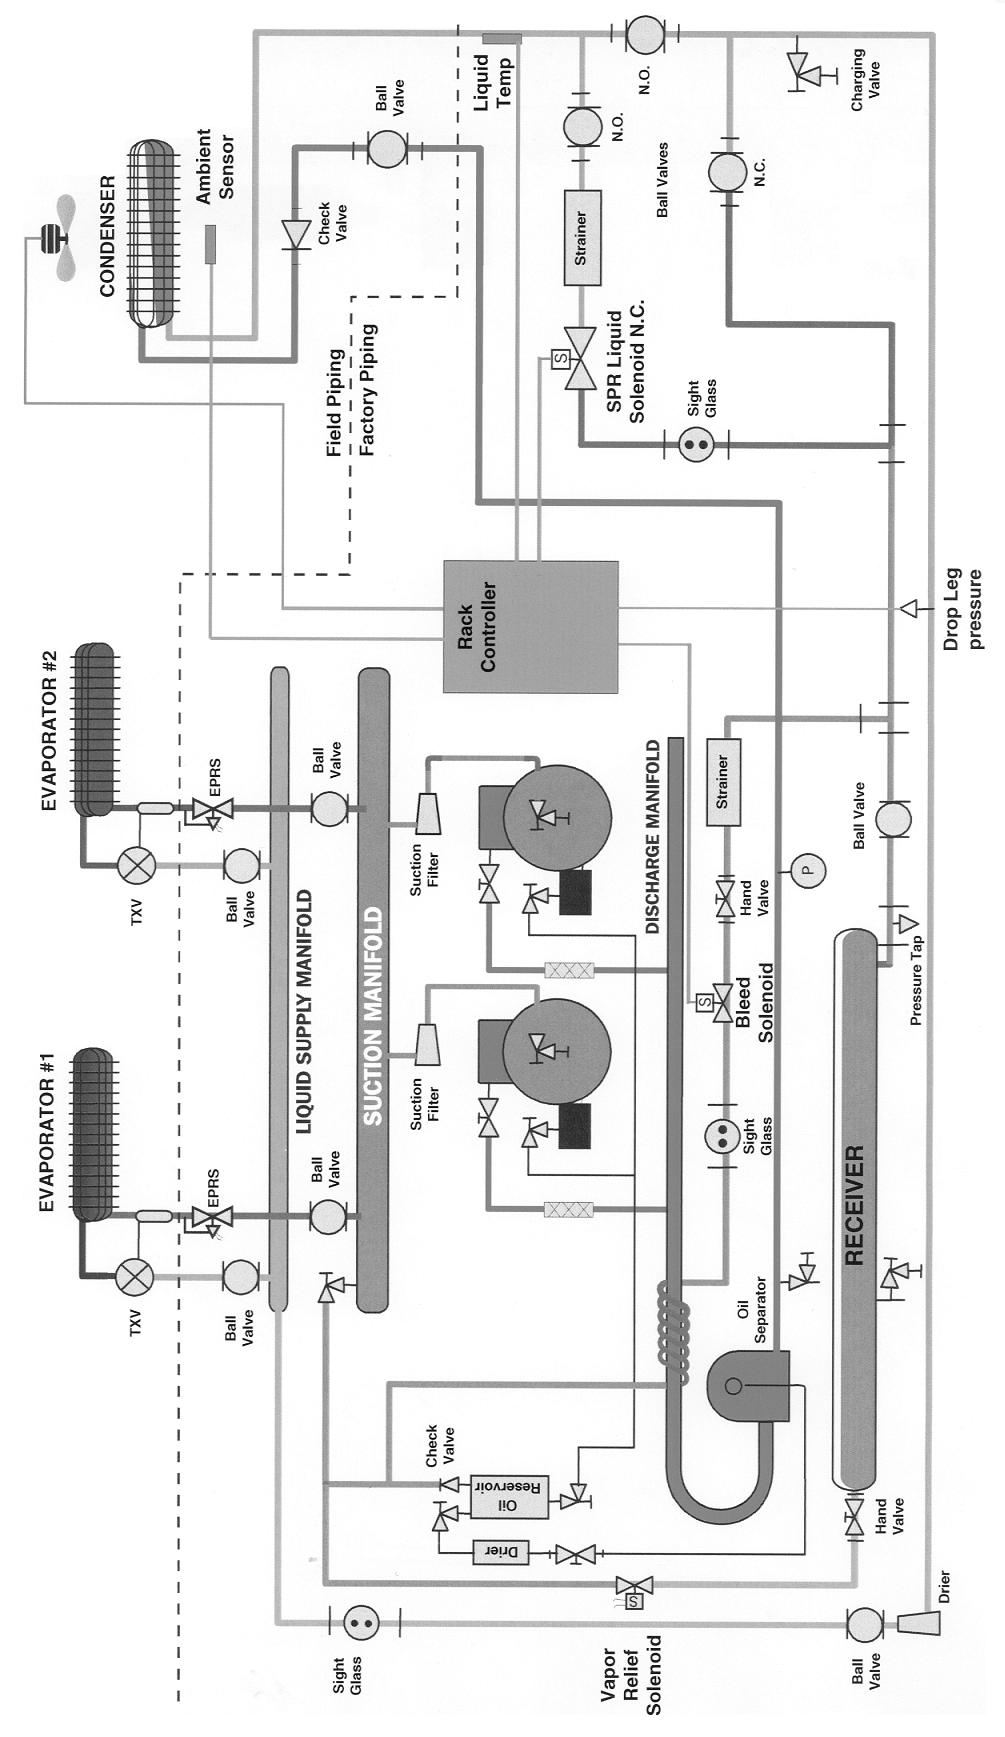 Enviroguard III Piping Diagram for Electric or Time